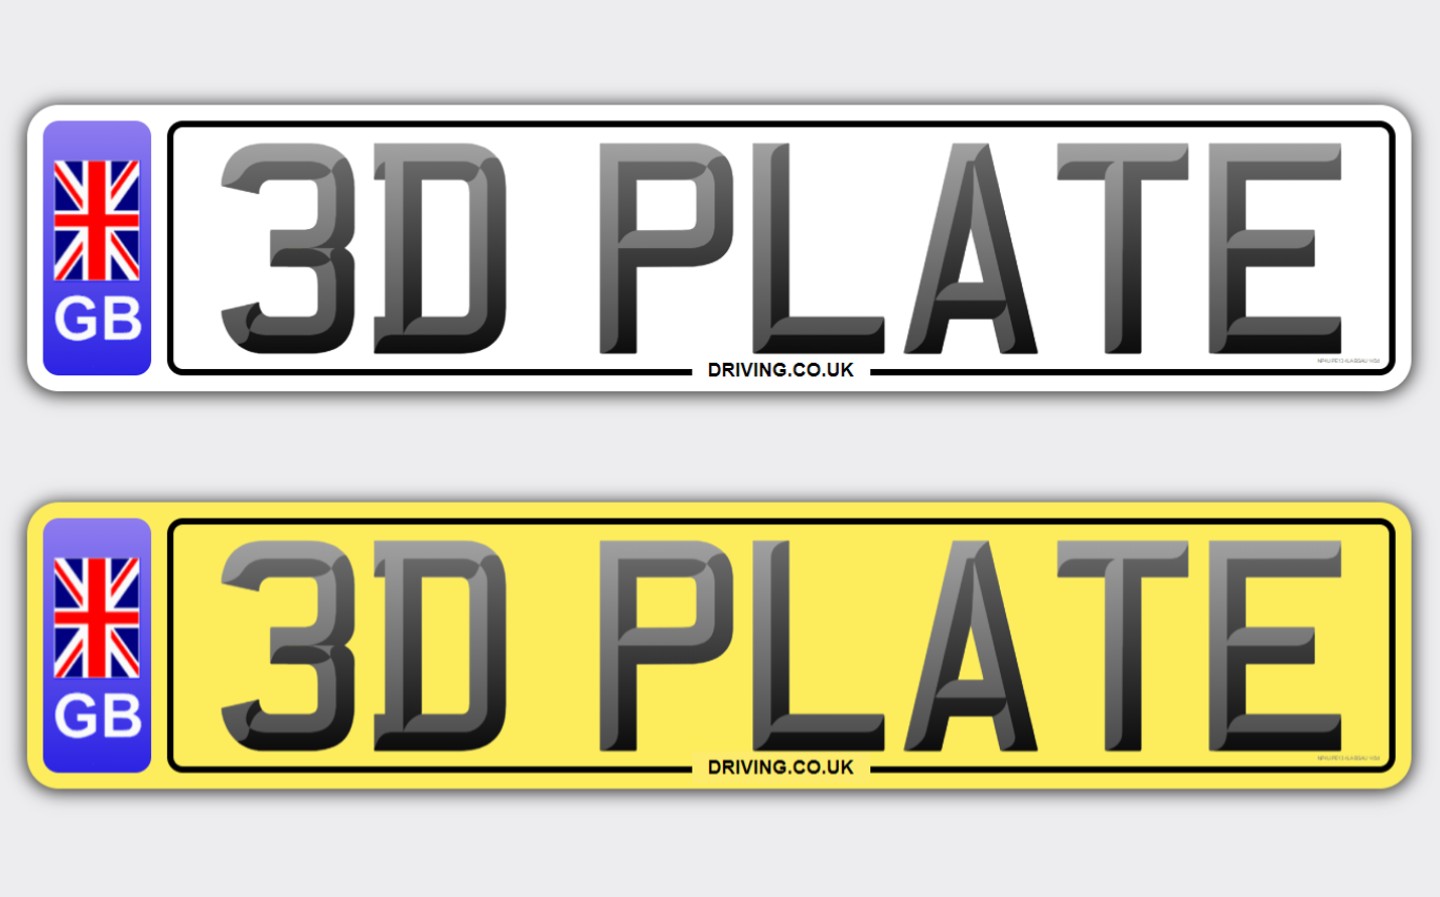 Are 3D and 4D number plates legal in the UK?